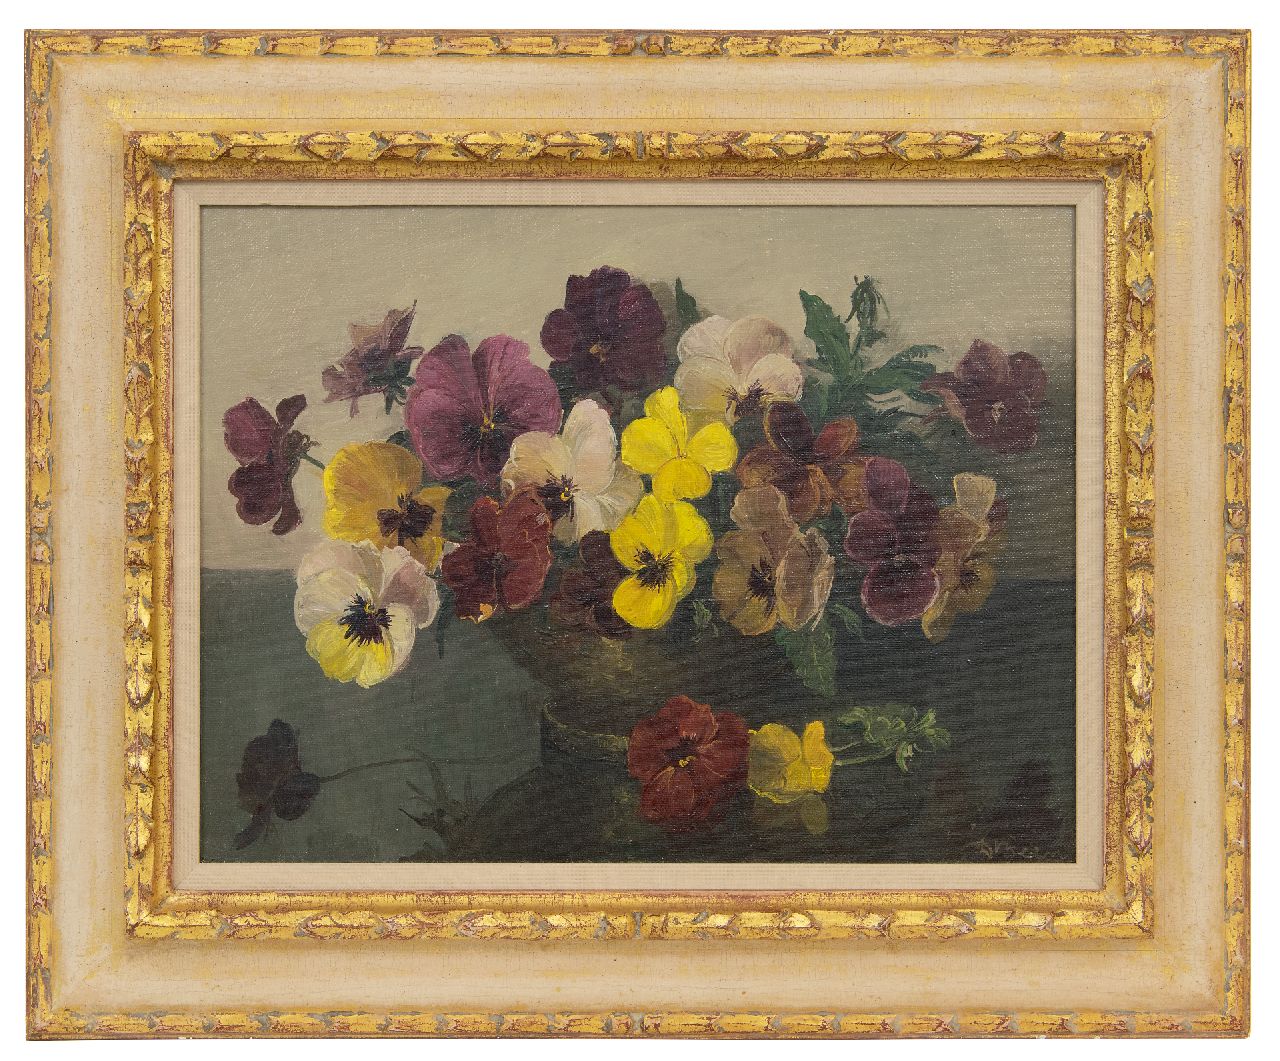 Been D.  | Daniël Been | Paintings offered for sale | Violets, oil on canvas 30.5 x 40.5 cm, signed l.r.